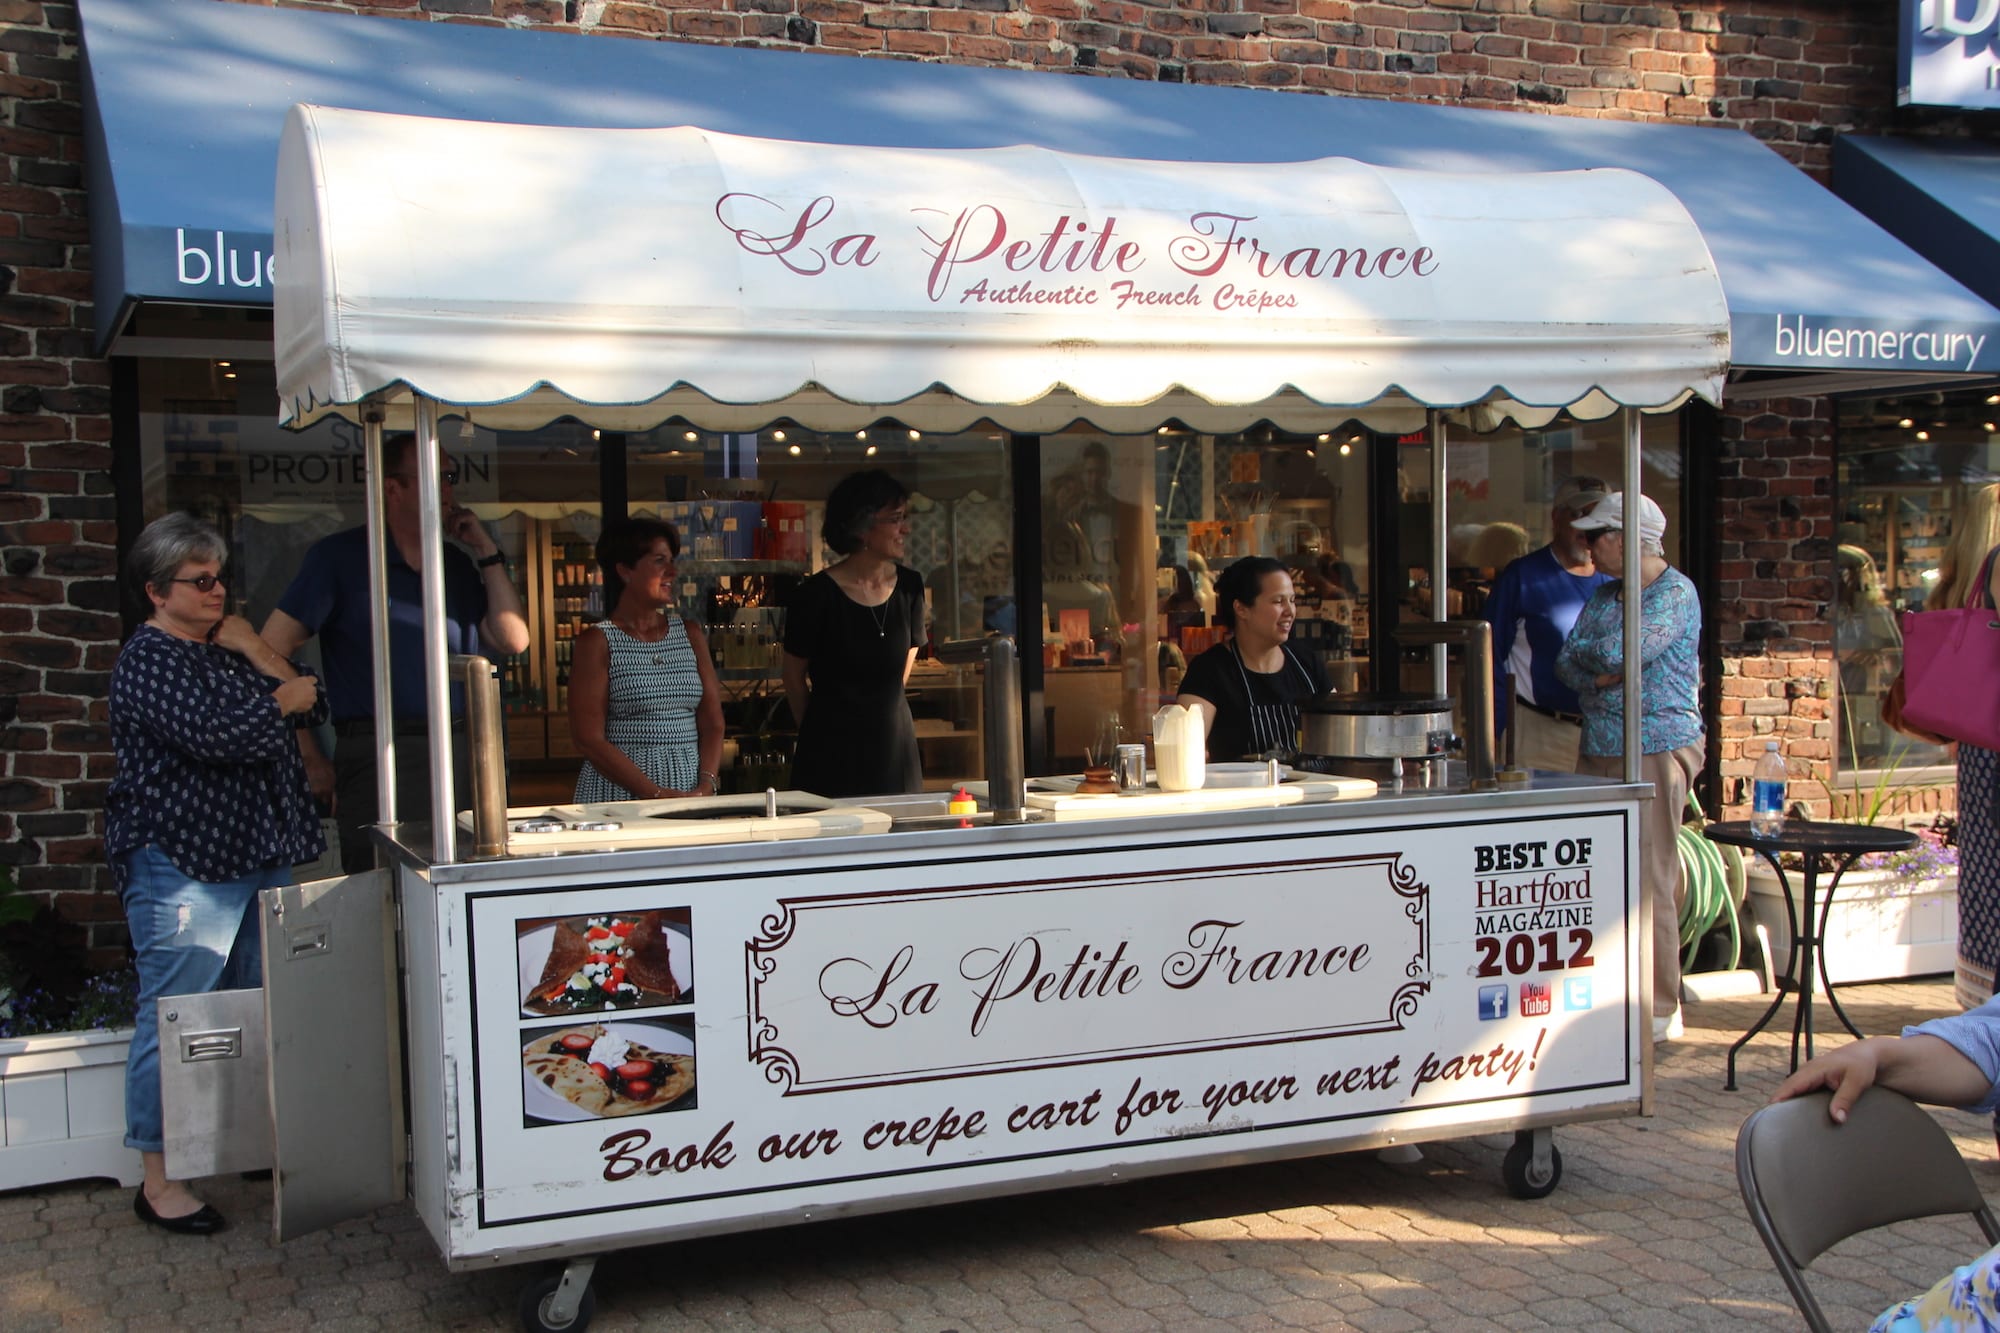 La Petite France 'Crepe Cook-off' preceeded the Fashion Show in West Hartford Center on the Town of West Hartford Showmobile stage on June 23, 2016. Photo credit: Dylan Carneiro